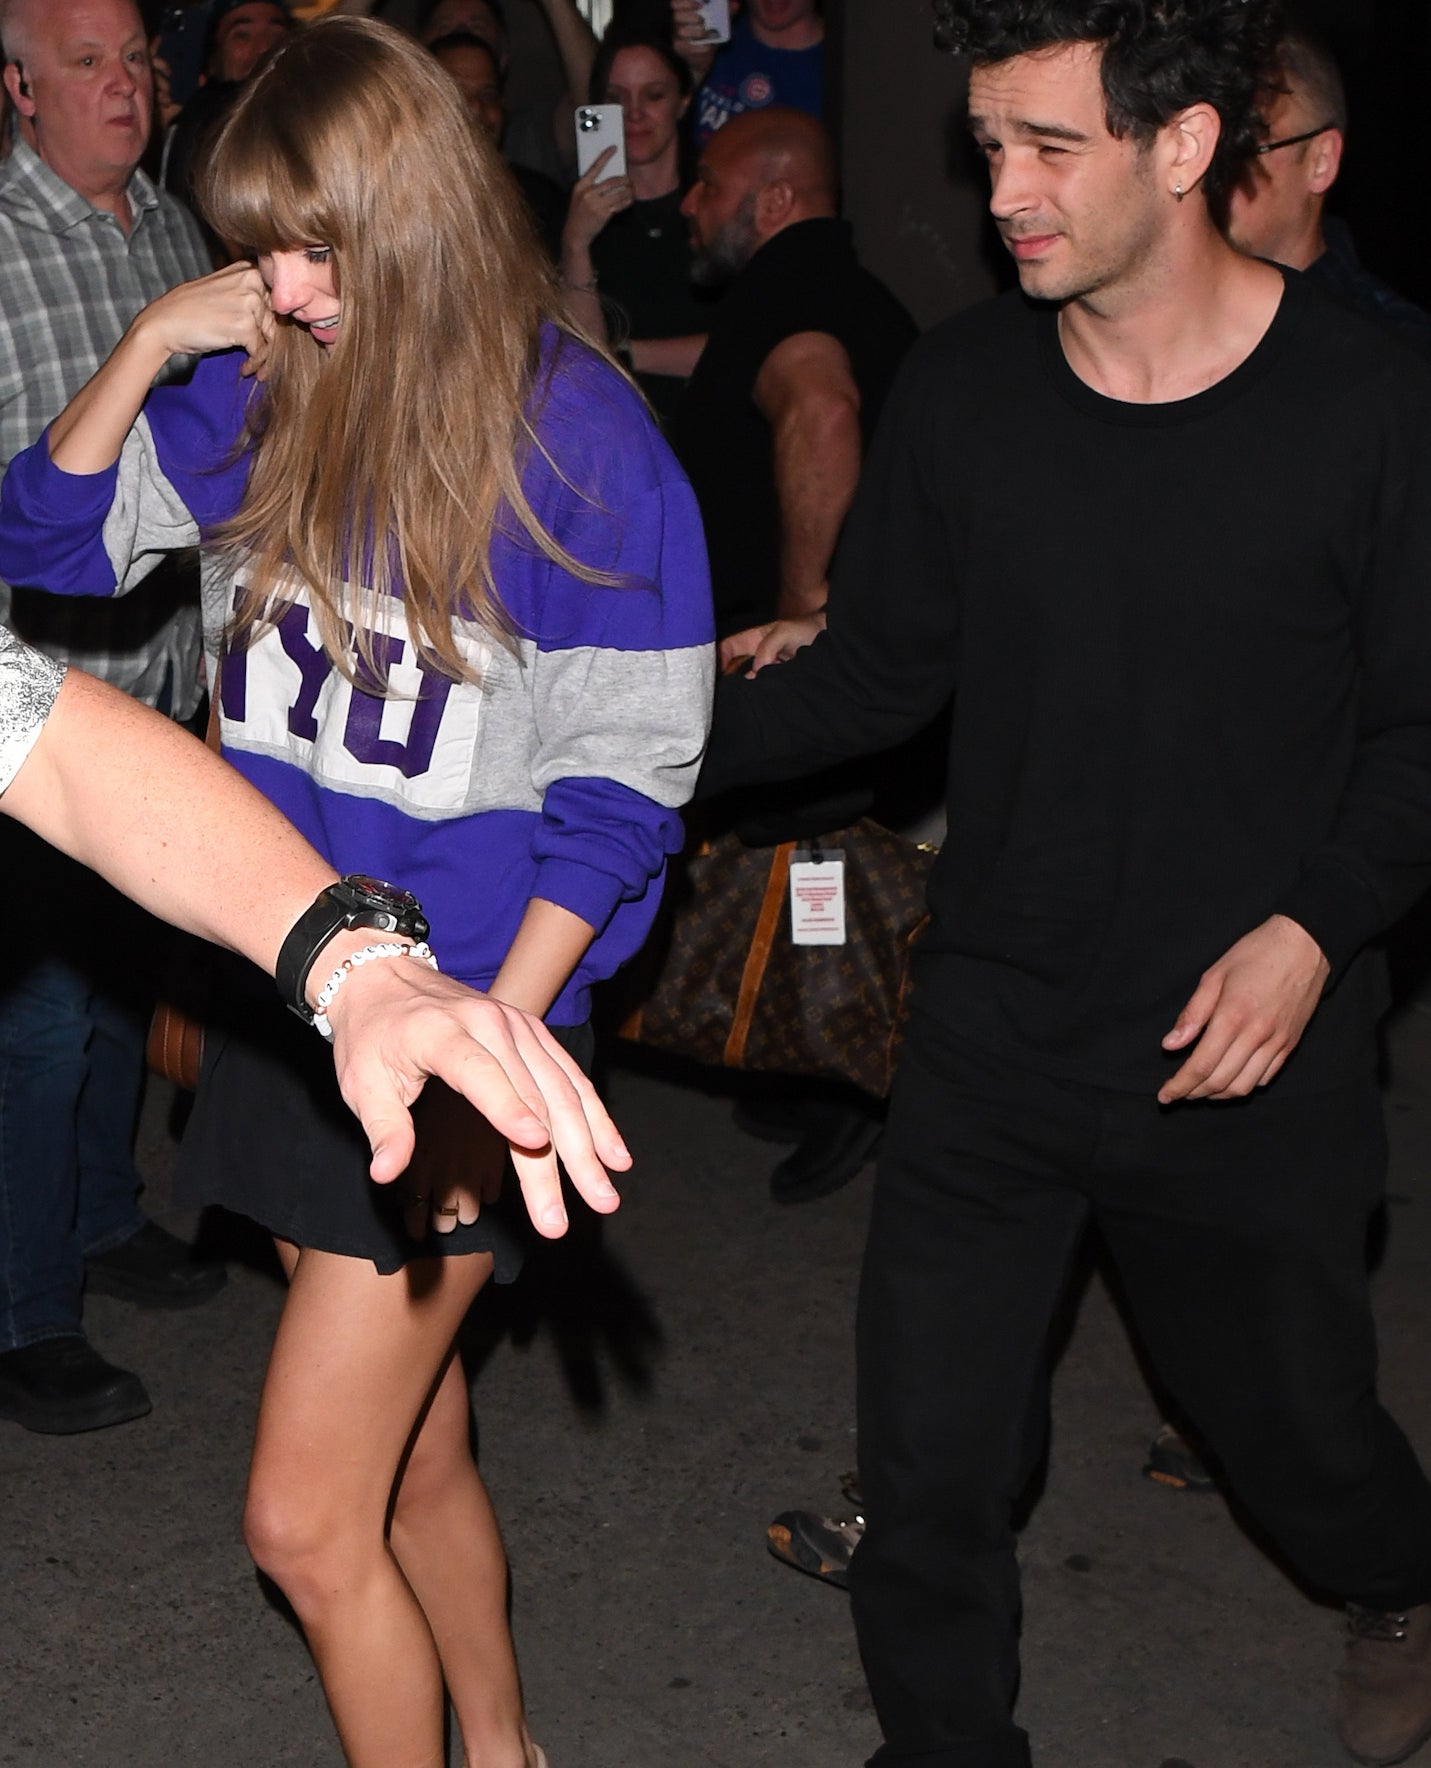 Taylor Swift in a purple sweatshirt with the number &quot;13&quot; escorted by Matty Healy in black through a crowd